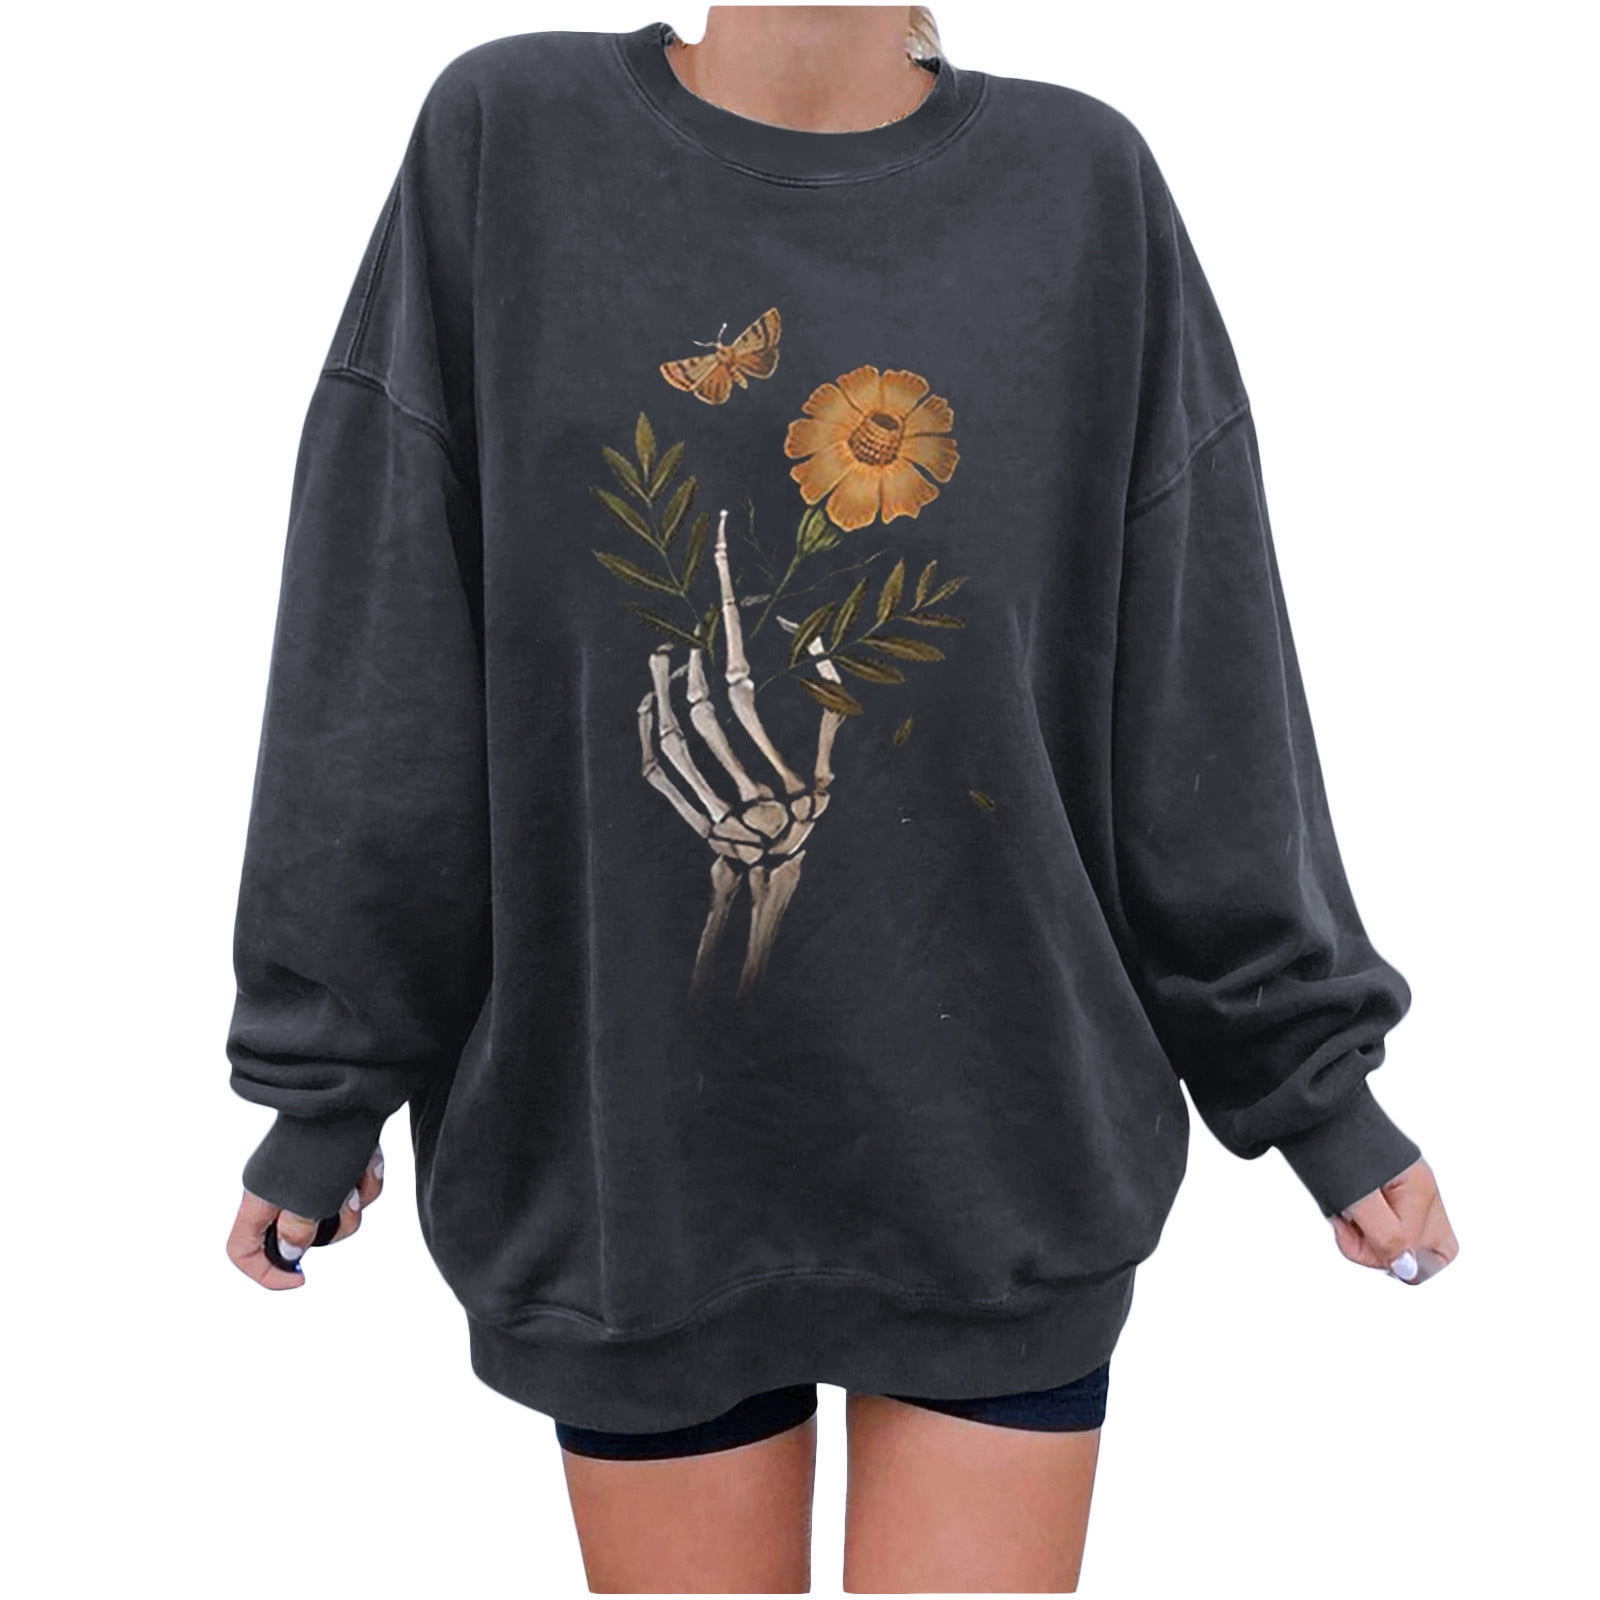 Ecrocoo Womens Floral Printed Blouses V Neck Long Sleeve Casual Shirts Ladies Autumn Loose Fit Tops Soft Drawstring Pullover,Black M 